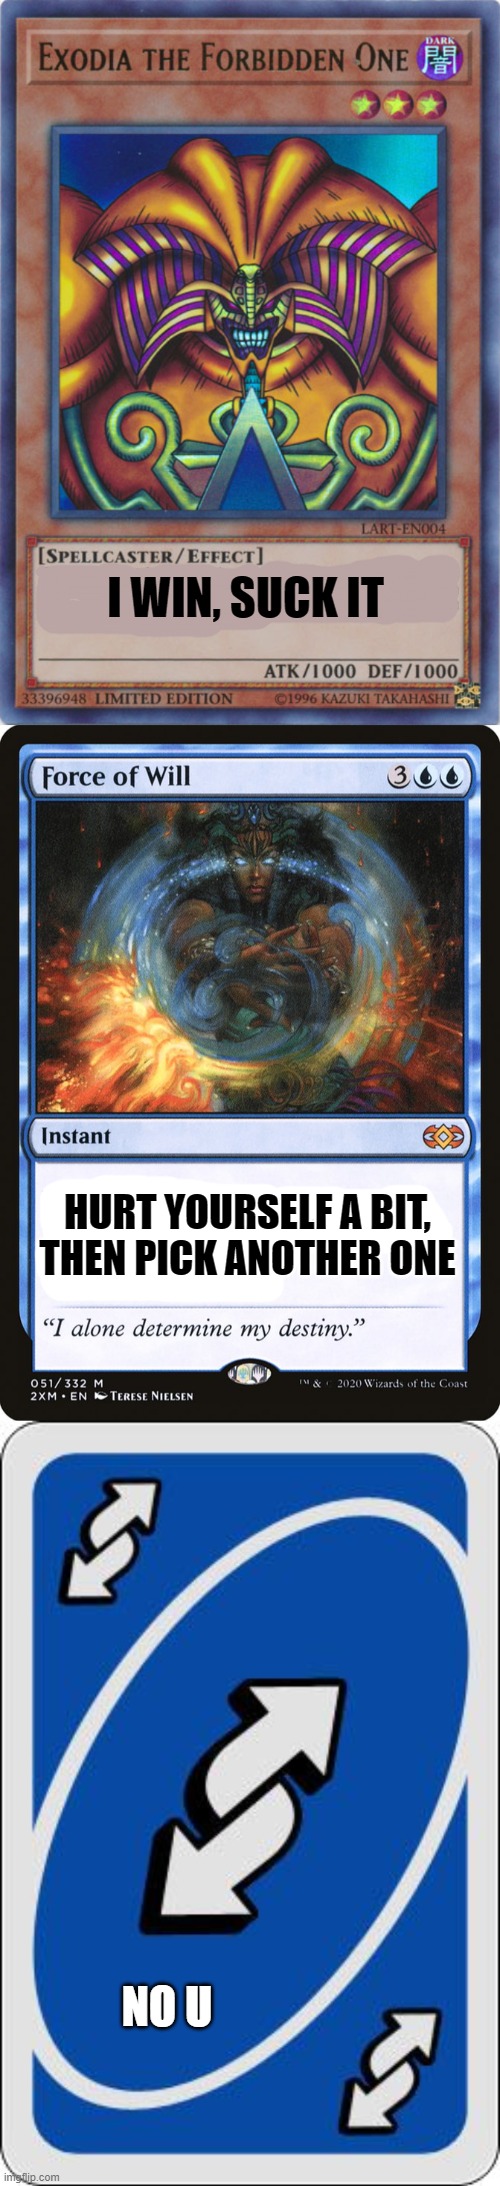 Top 3 Gaming Cards | I WIN, SUCK IT; HURT YOURSELF A BIT, THEN PICK ANOTHER ONE; NO U | image tagged in cards,yugioh,magic the gathering,uno,gaming,games | made w/ Imgflip meme maker